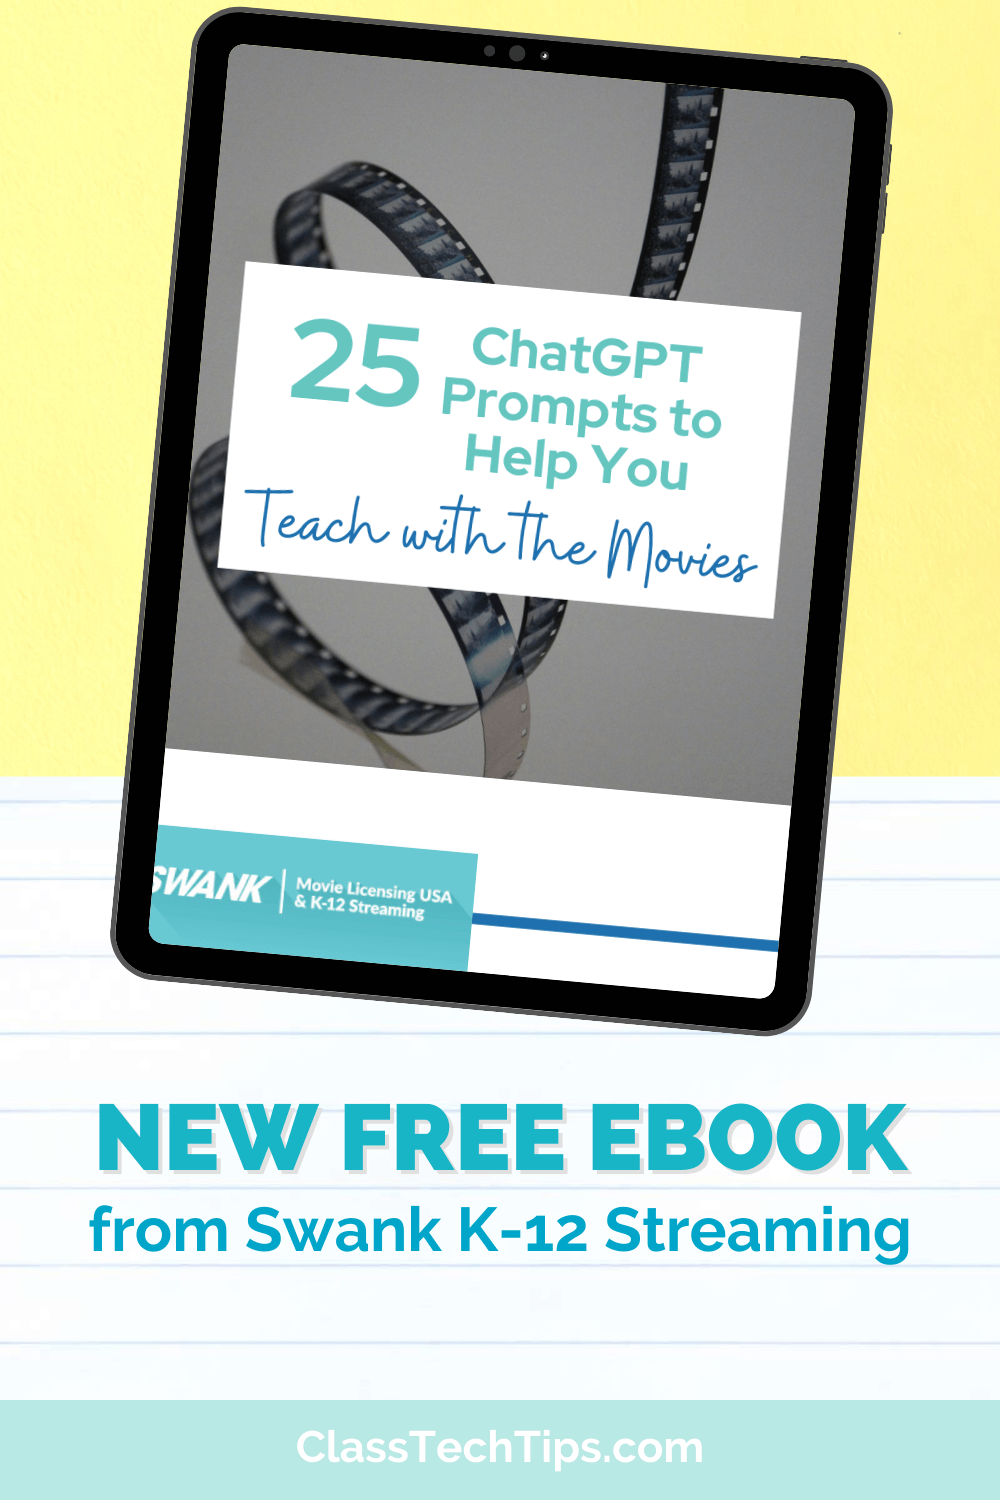 An e-reader displaying the cover of a free eBook titled "25 ChatGPT Prompts to Help You Teach with the Movies", offered by Swank K-12 Streaming, as advertised on ClassTechTips.com.